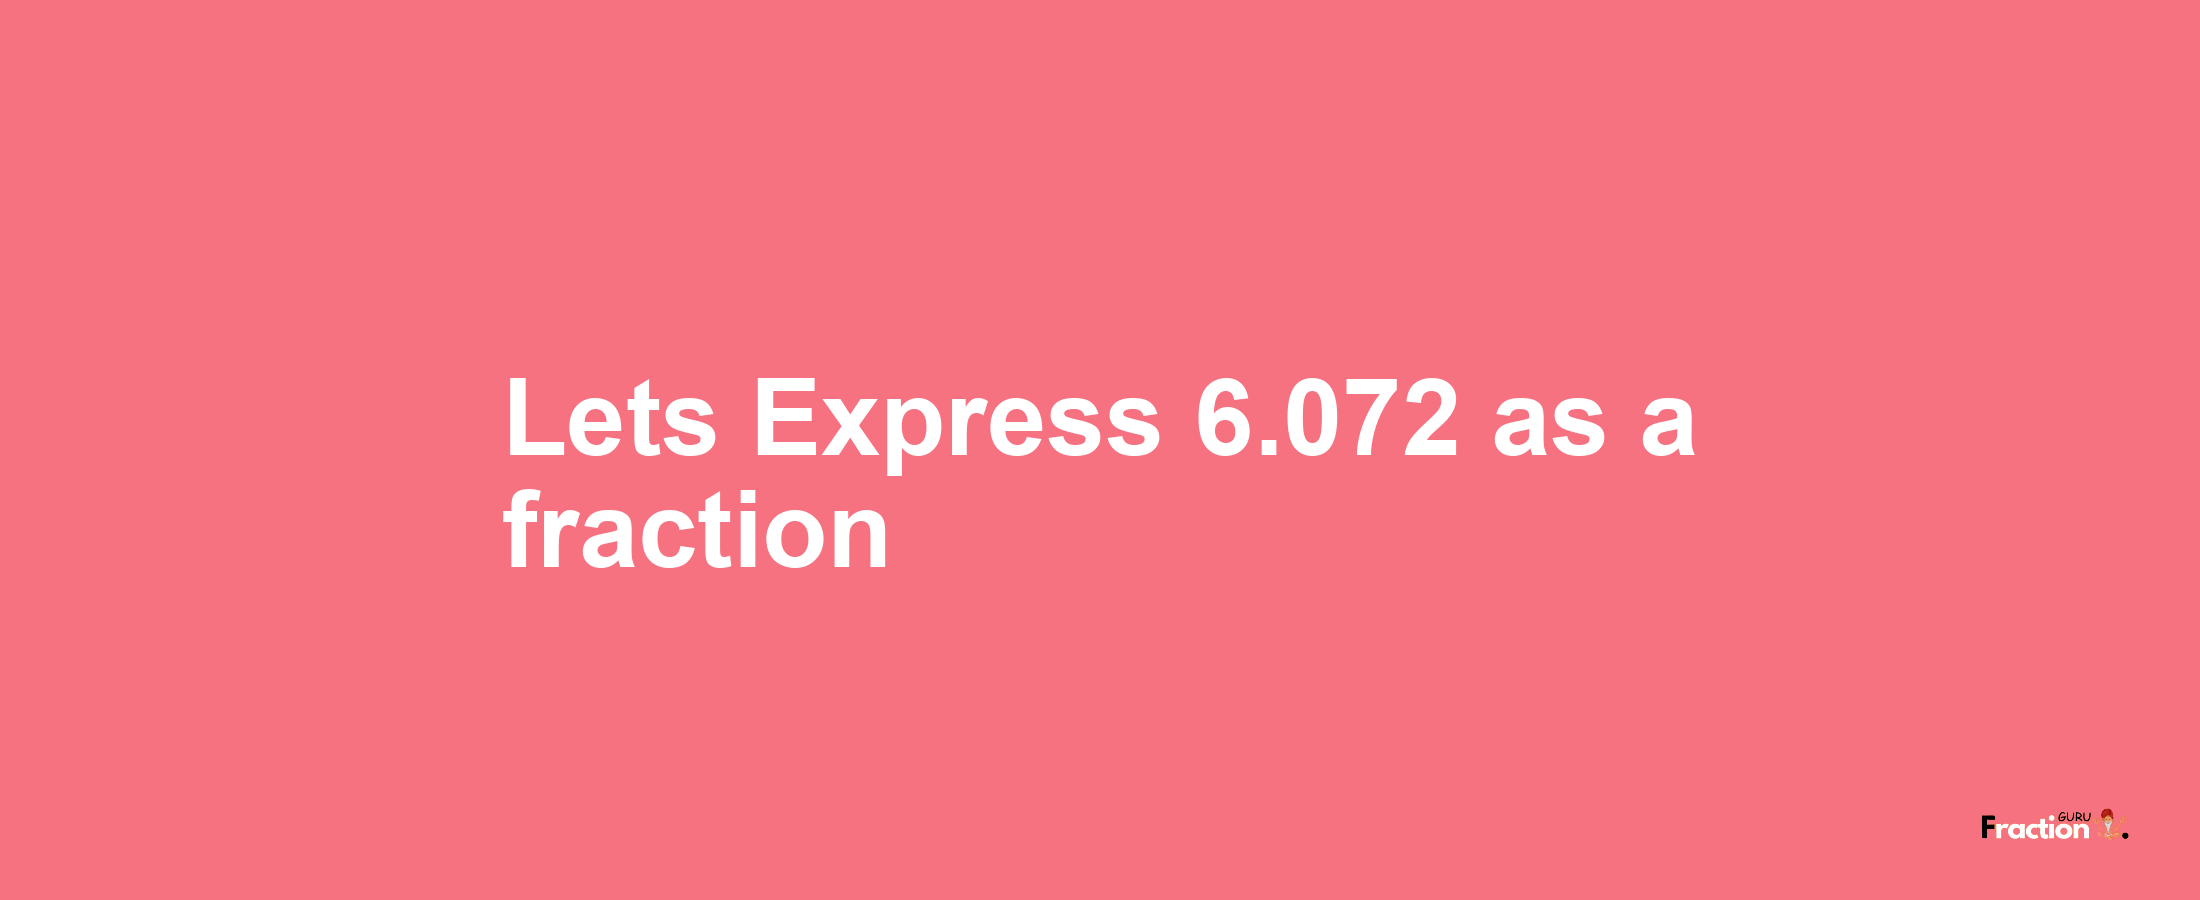 Lets Express 6.072 as afraction